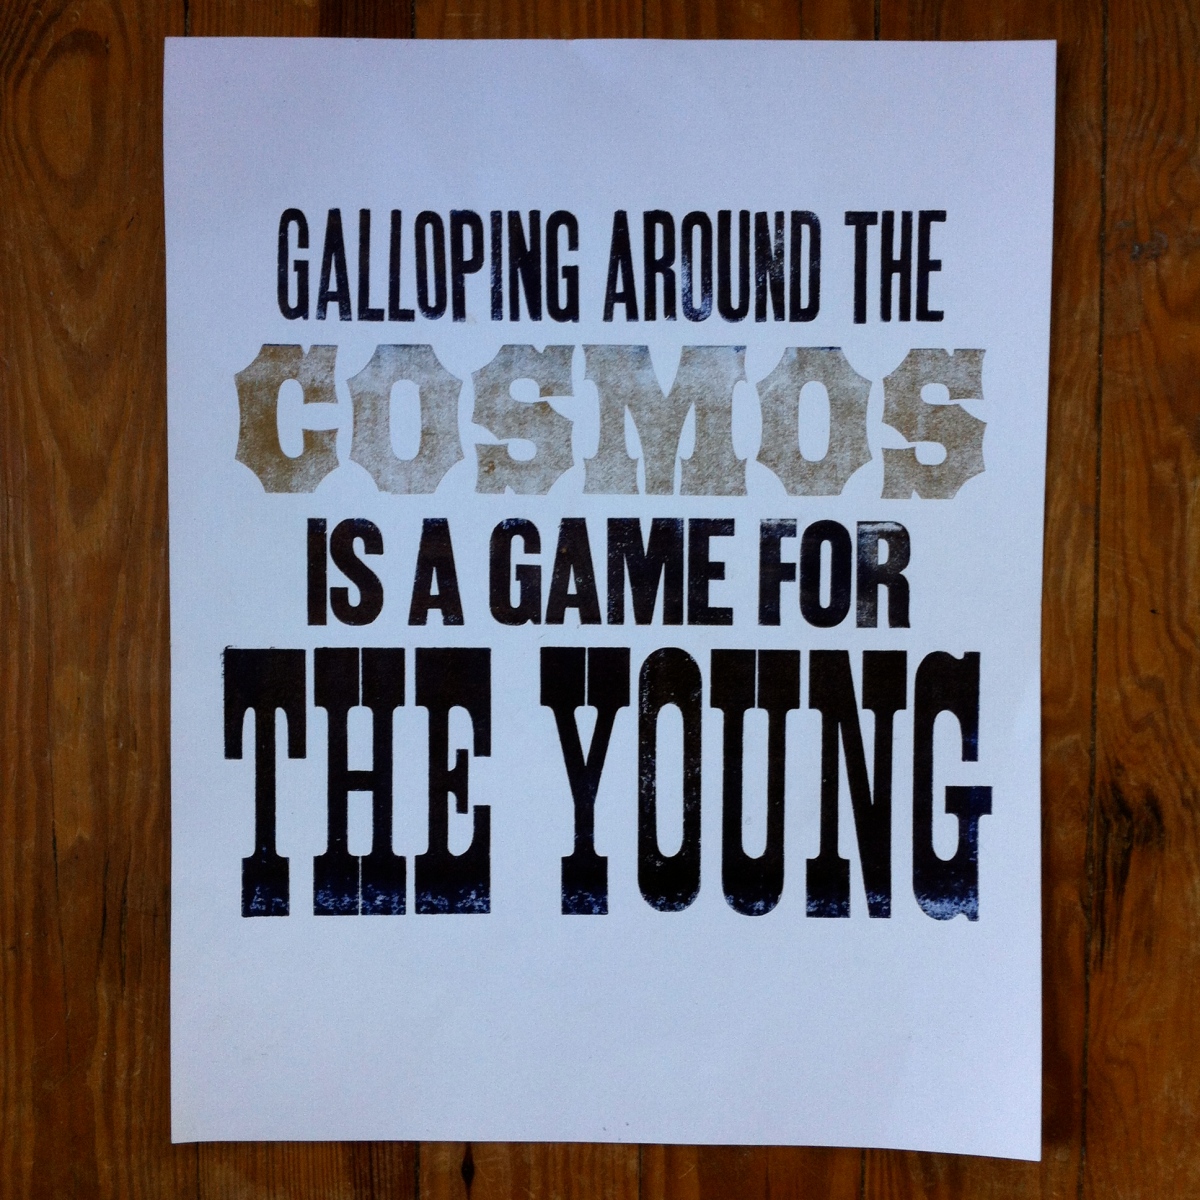 Galloping around the Cosmos is a game for the young.